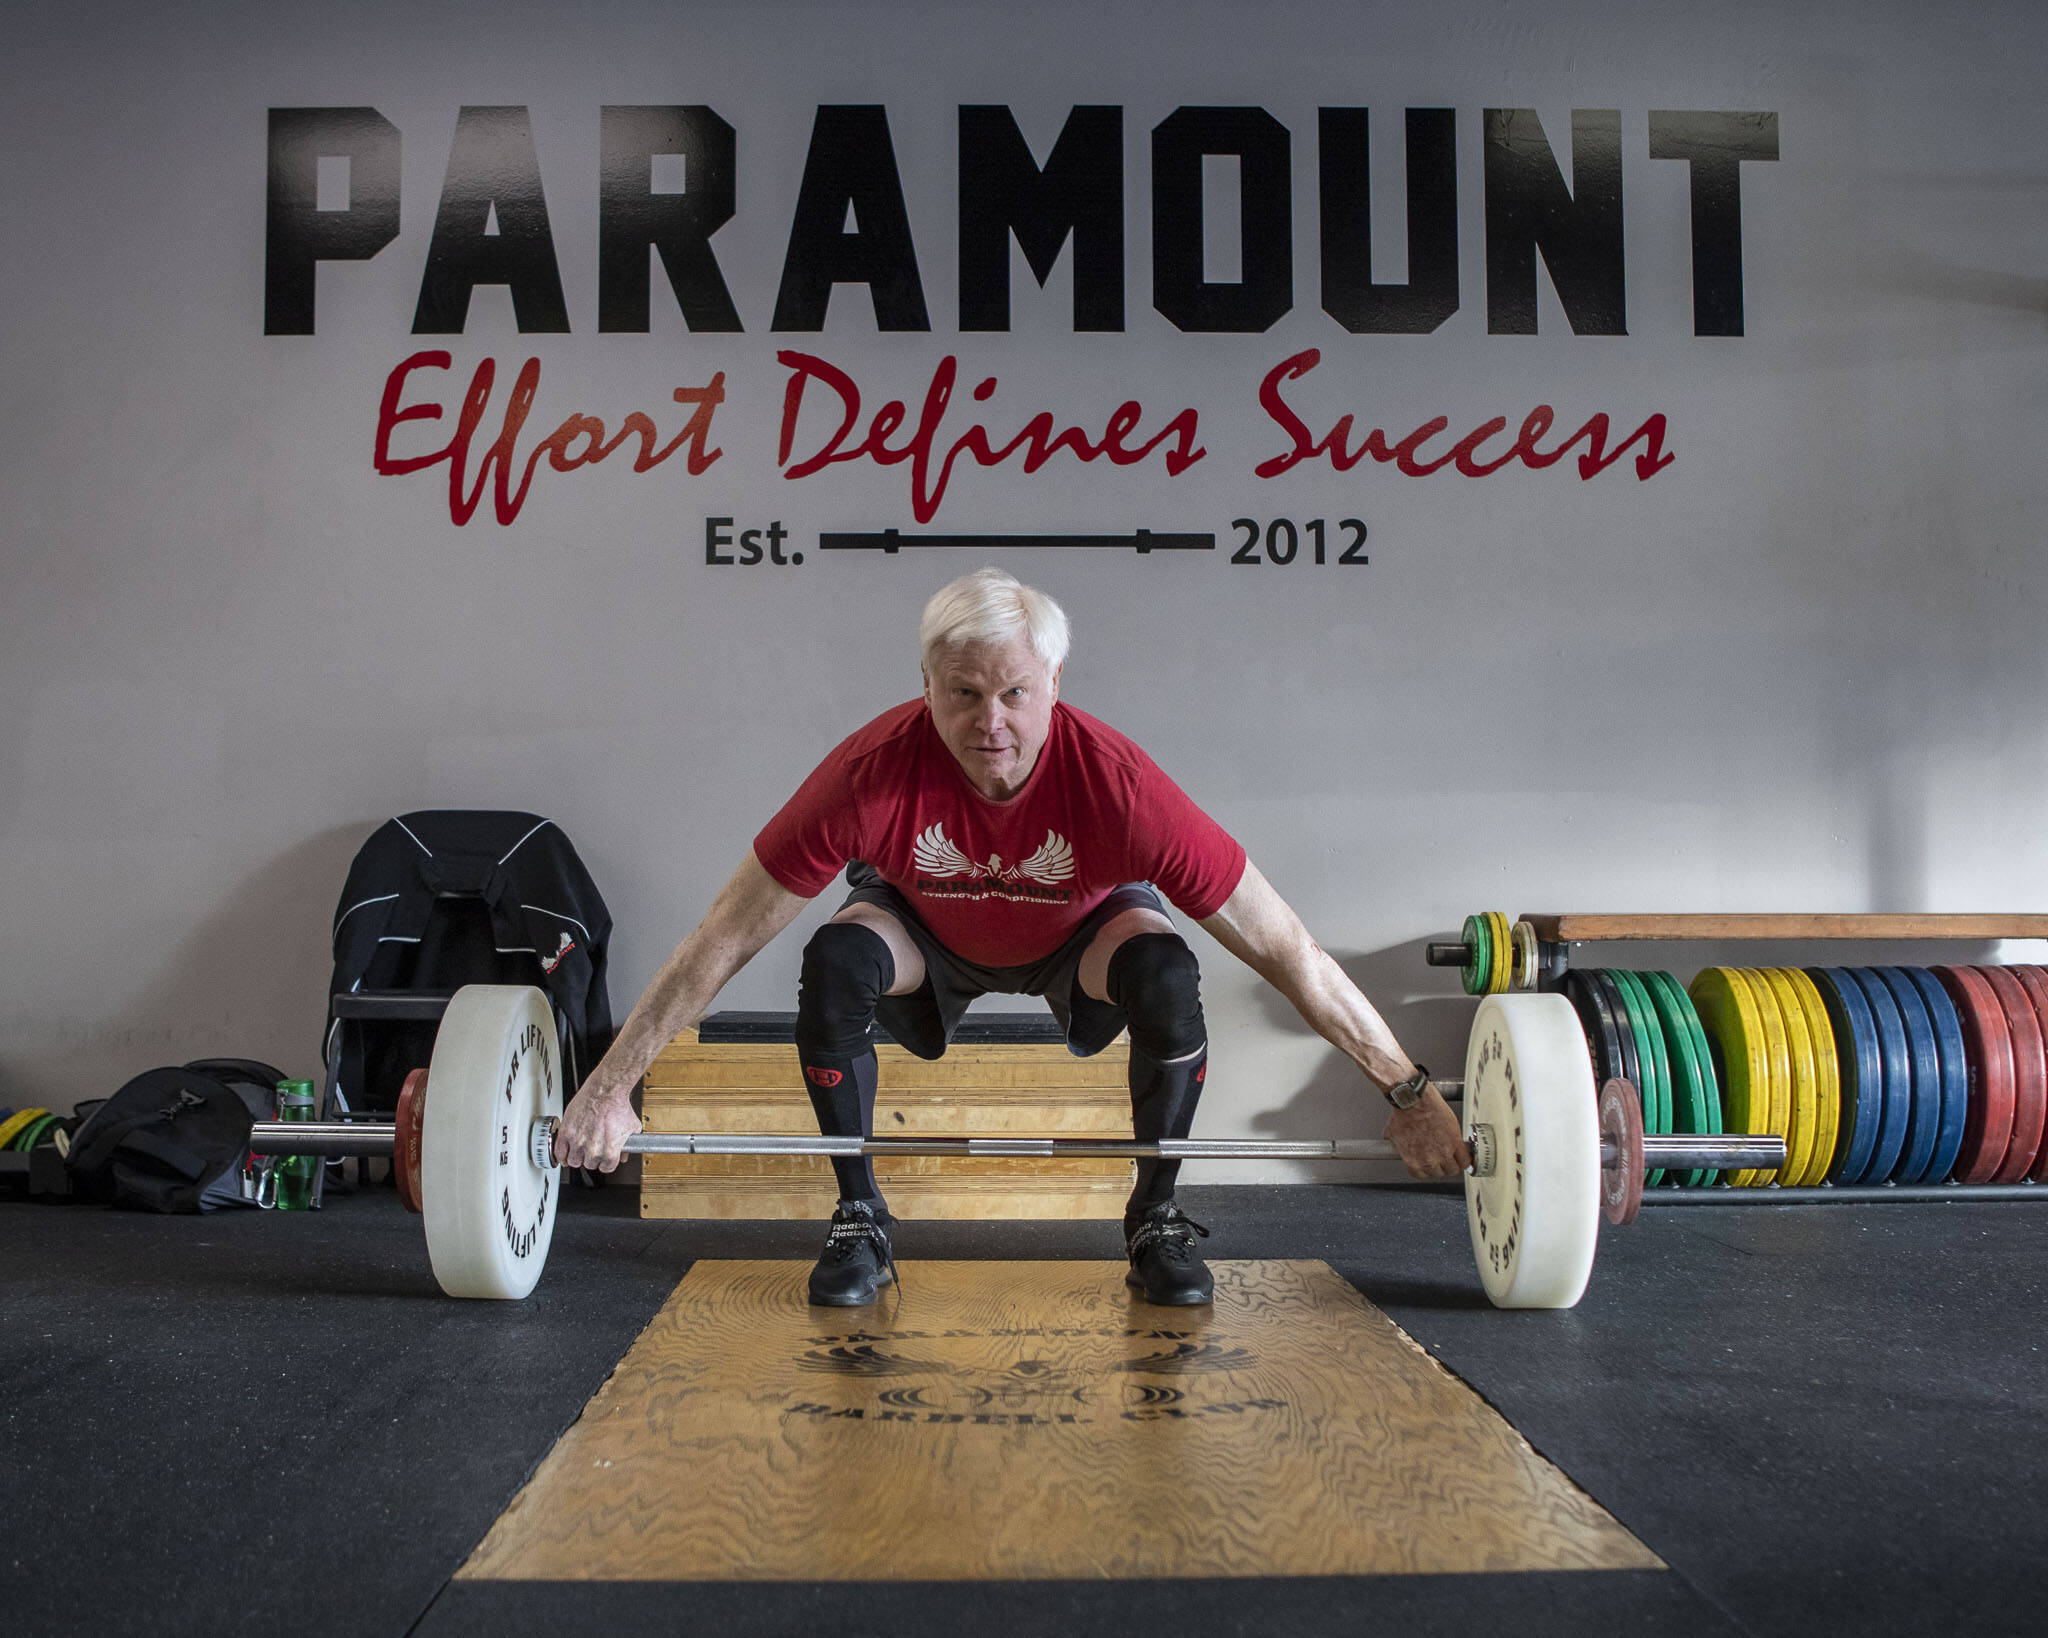 Phil Arnold, 74, practices his lifting techniques at Paramount Strength and Conditioning in Mountlake Terrace, Washington on Thursday, Feb. 2, 2023. The Edmonds resident is 74 and recently retired as an attorney. He took up weightlifting after retirement and recently won a national championship. (Annie Barker / The Herald)